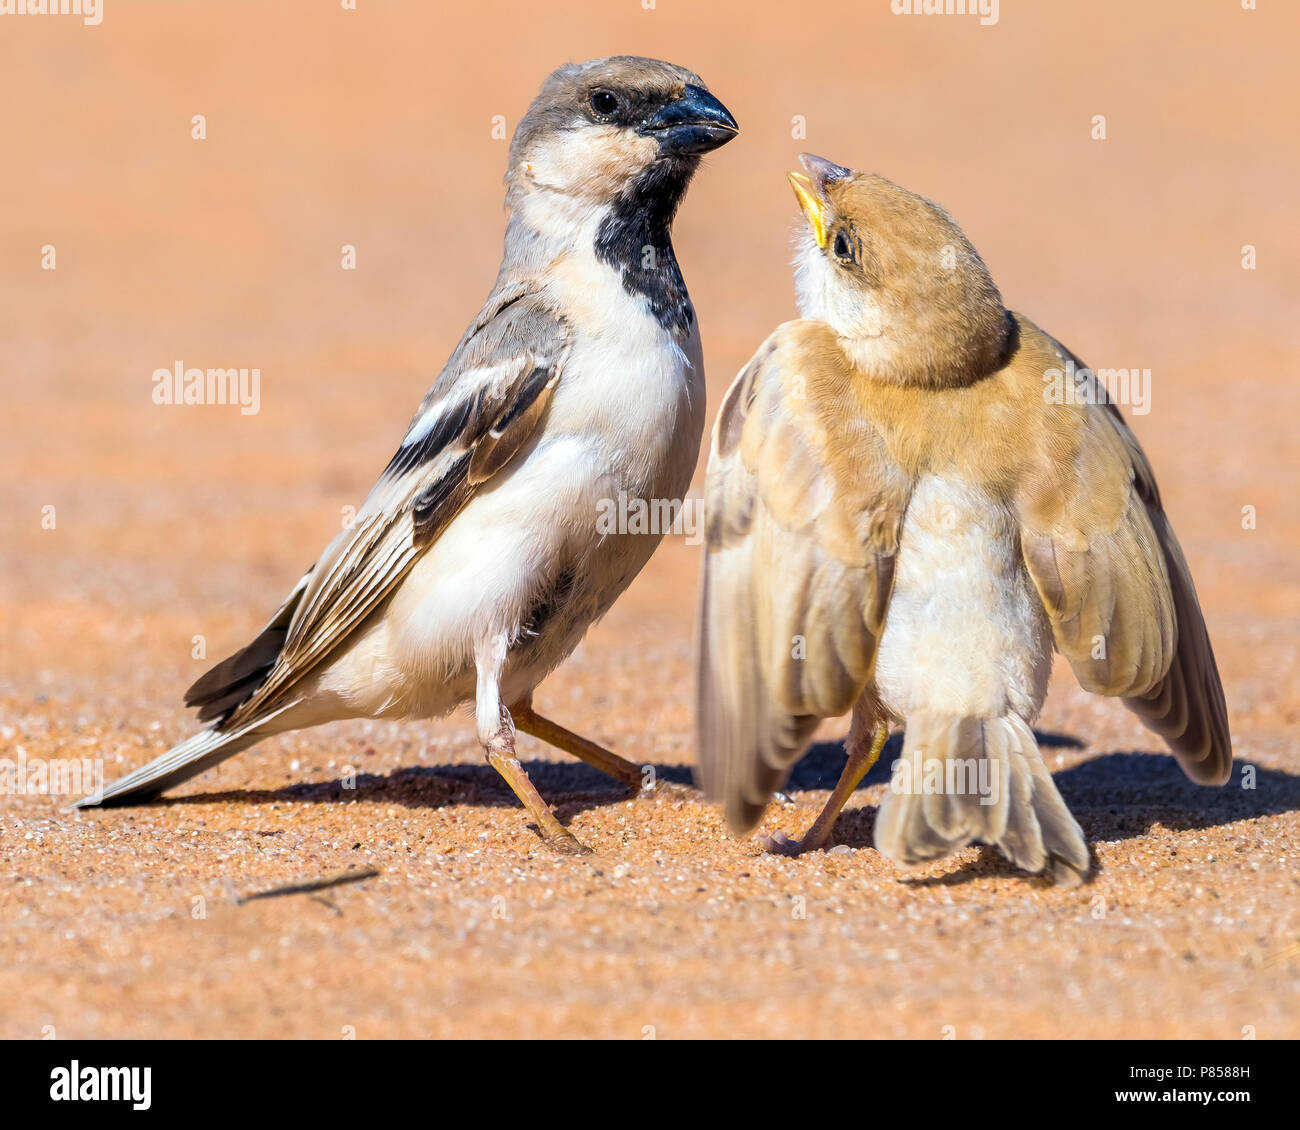 Male & juvenile Northern Desert Sparrow in Oued Jenna, Western Sahara. March 2011. Stock Photo